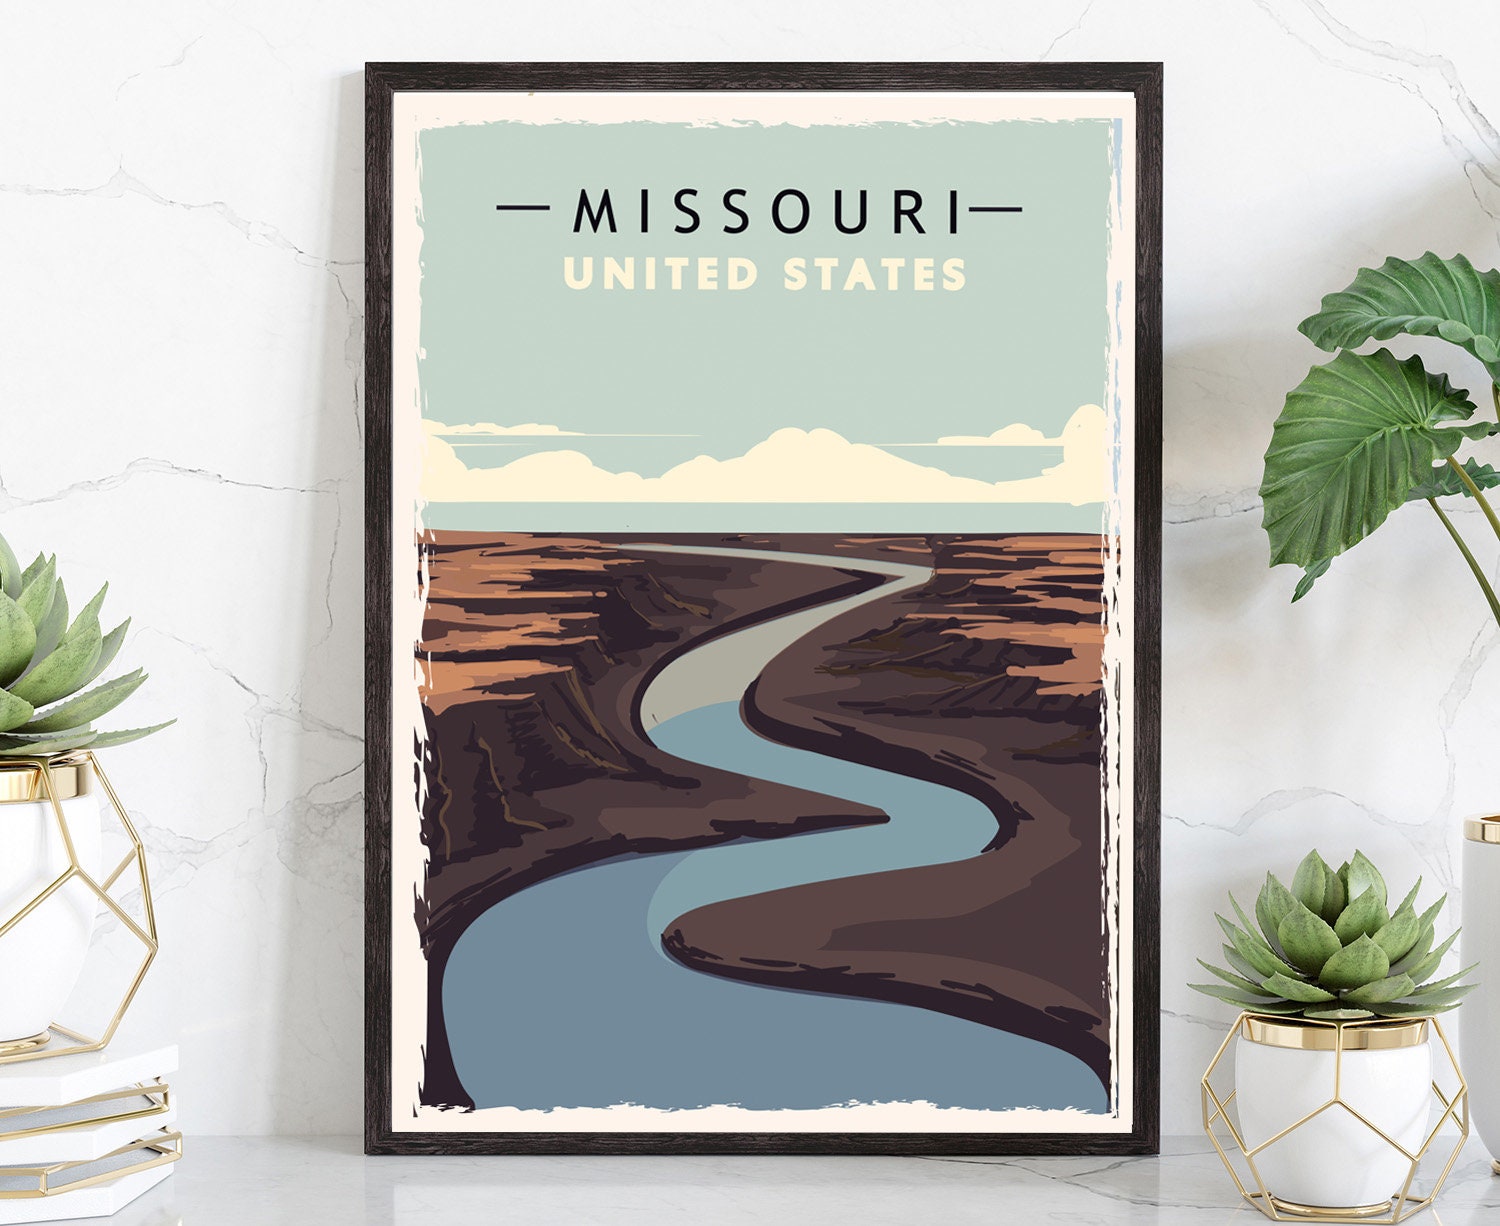 Retro Style Travel Poster, Missouri Vintage Rustic Poster Print, Home Wall Art, Office Wall Decor, Poster Prints, Missouri, State Map Poster